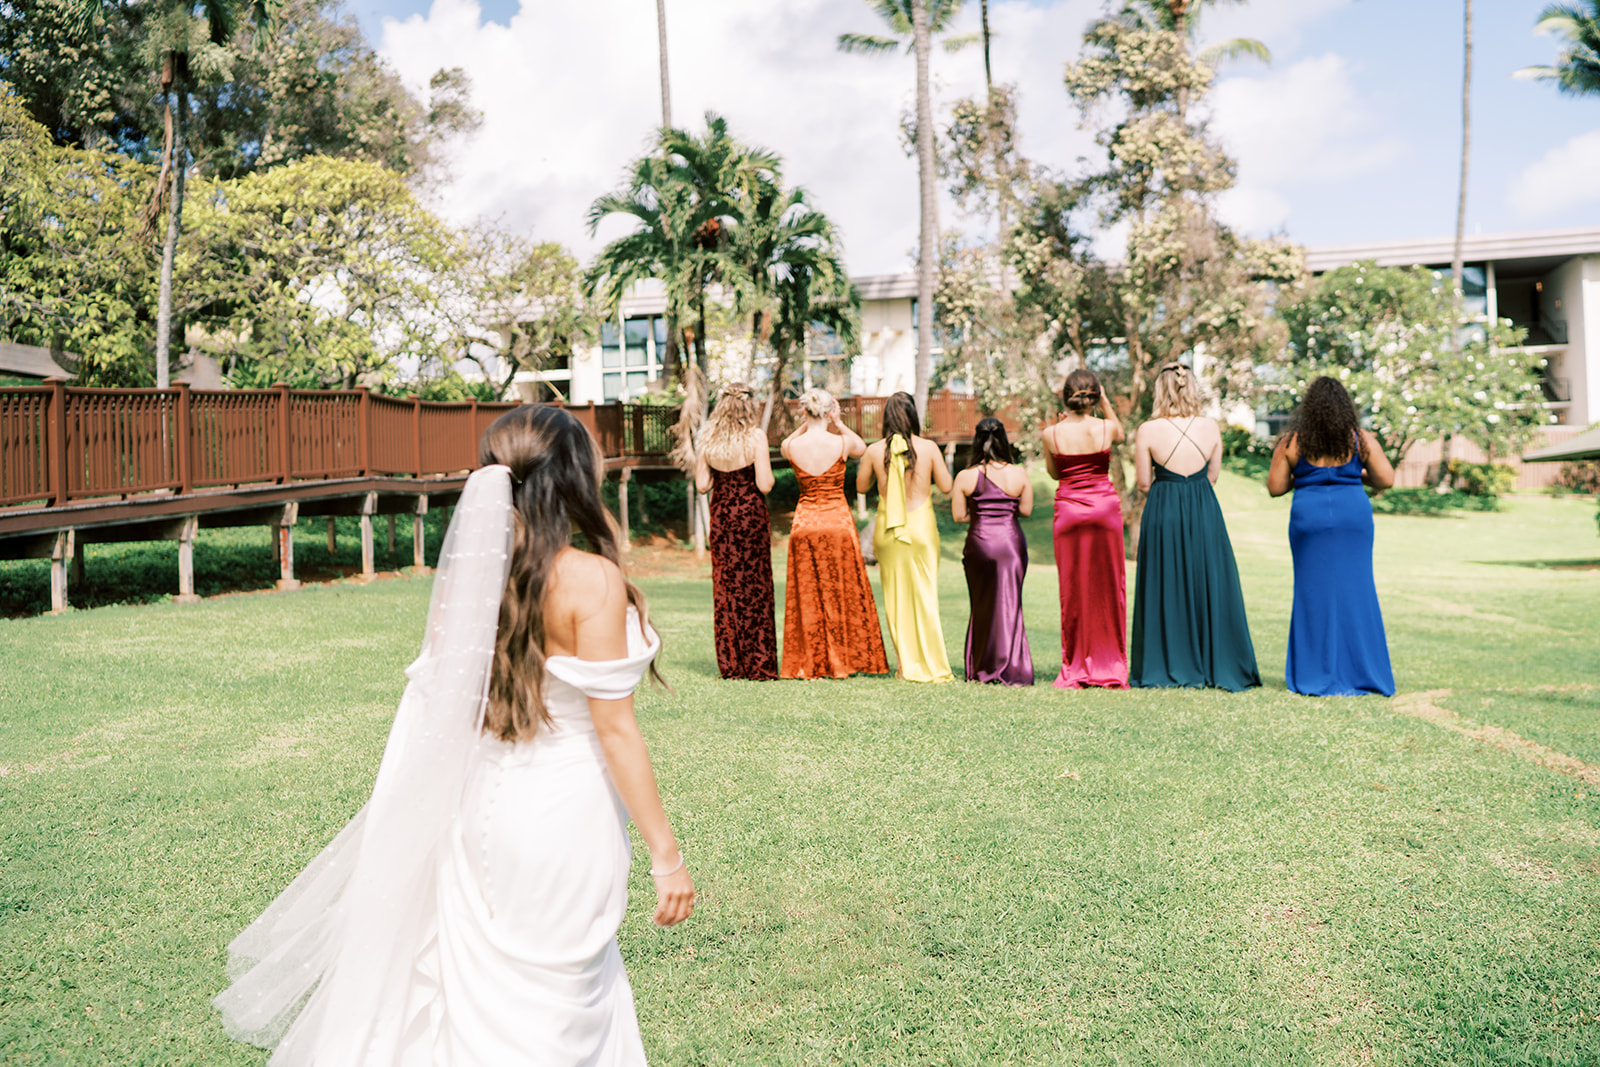 A bride approaching a group of bridesmaids dressed in colorful gowns, all standing outdoors on Smiths Tropical Paradise